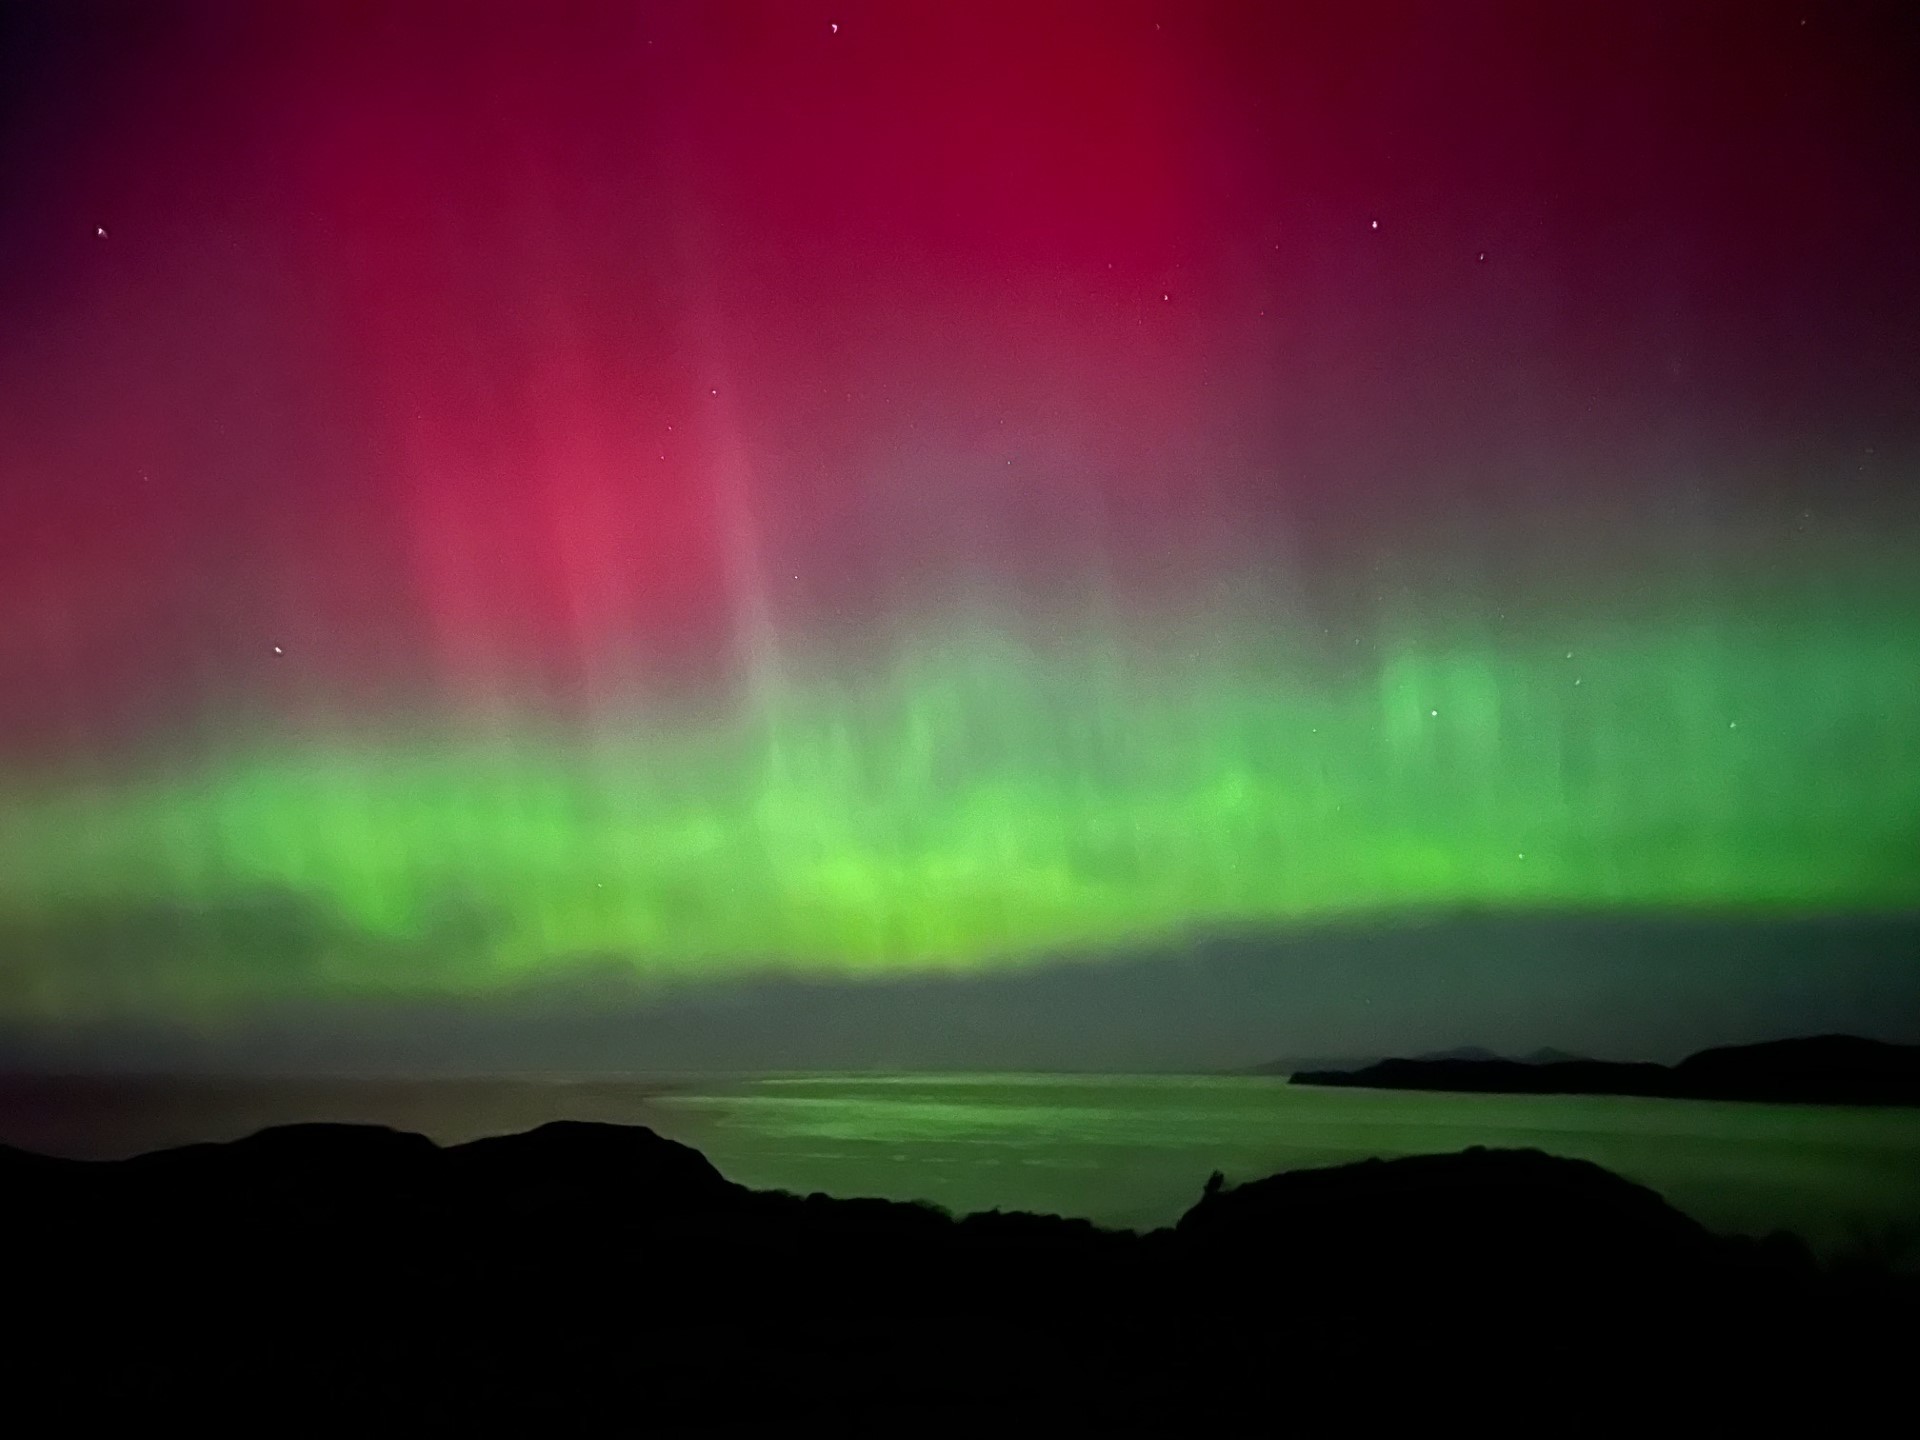 Julie was lucky to experience and photograph the Northern Lights last year while on holiday in Mull